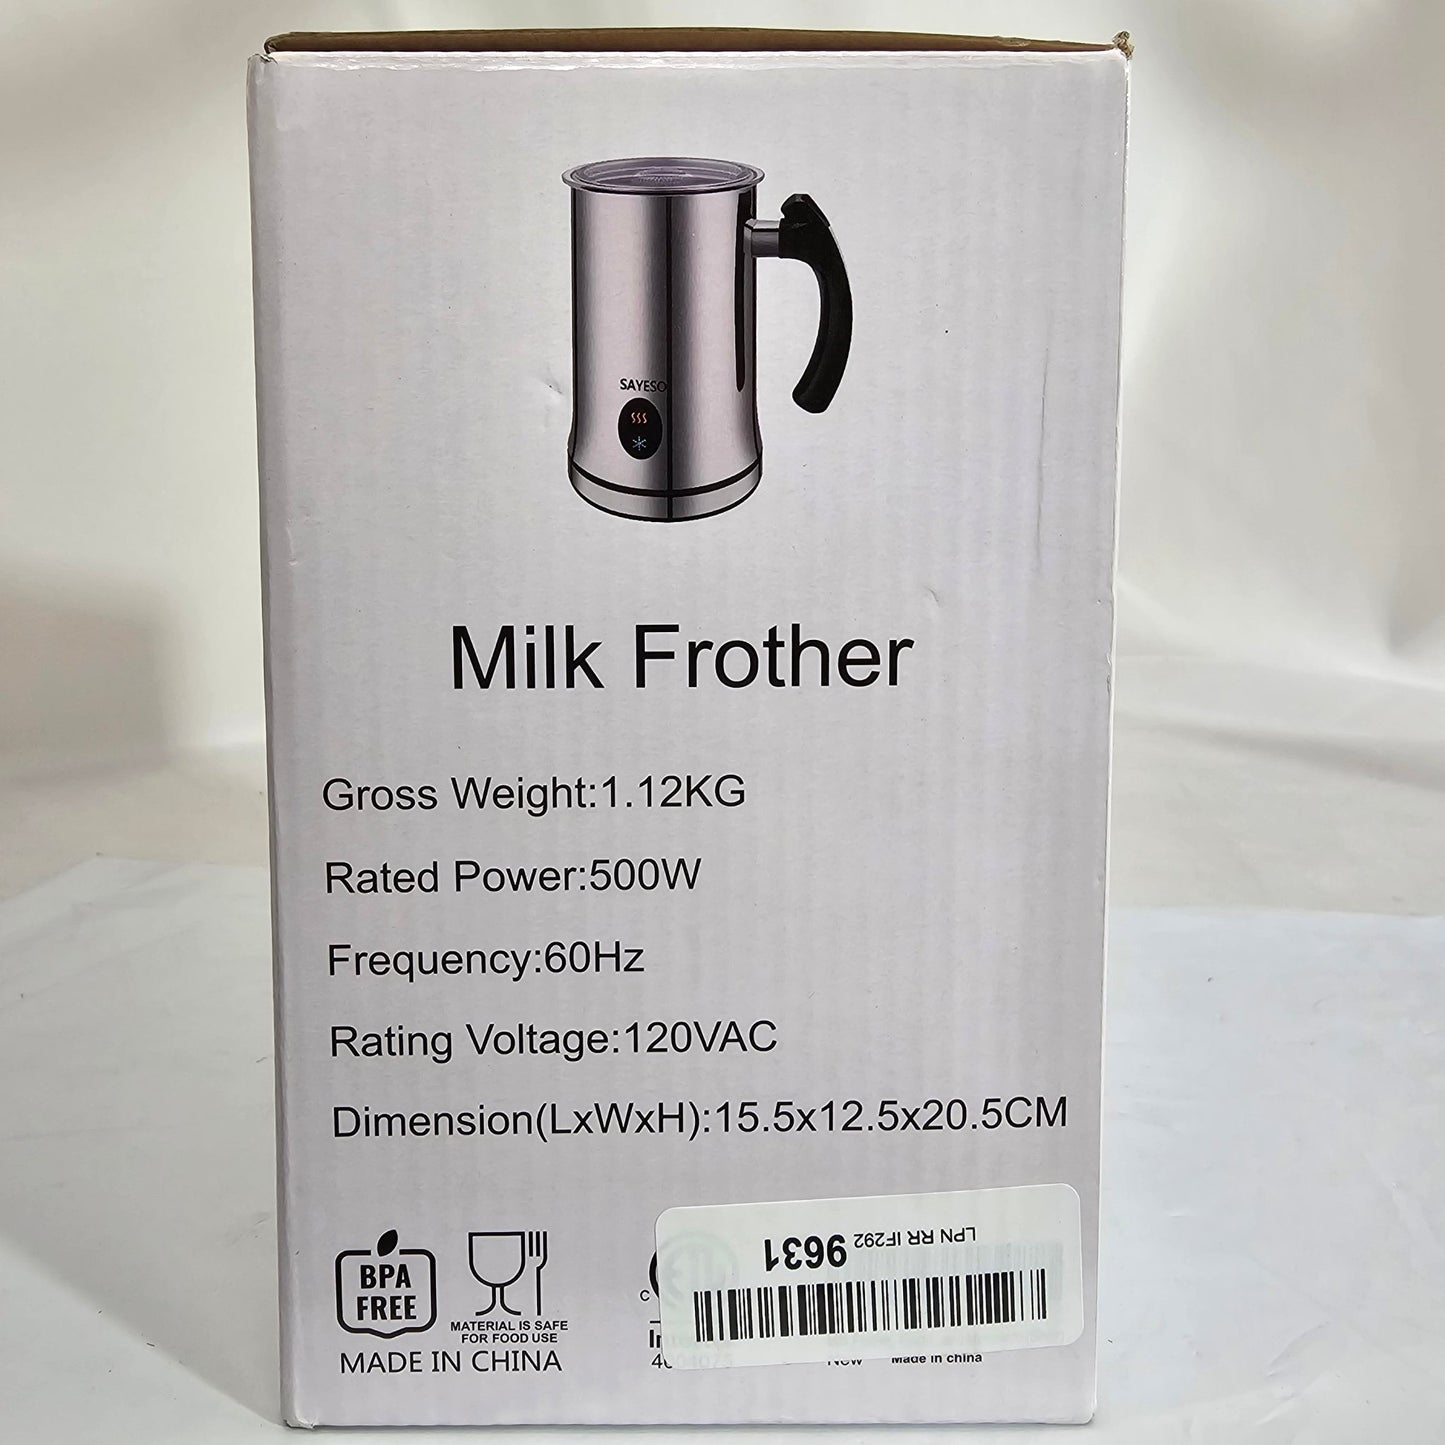 Milk Frother Silver Sayeso MMF-503-V2 - DQ Distribution